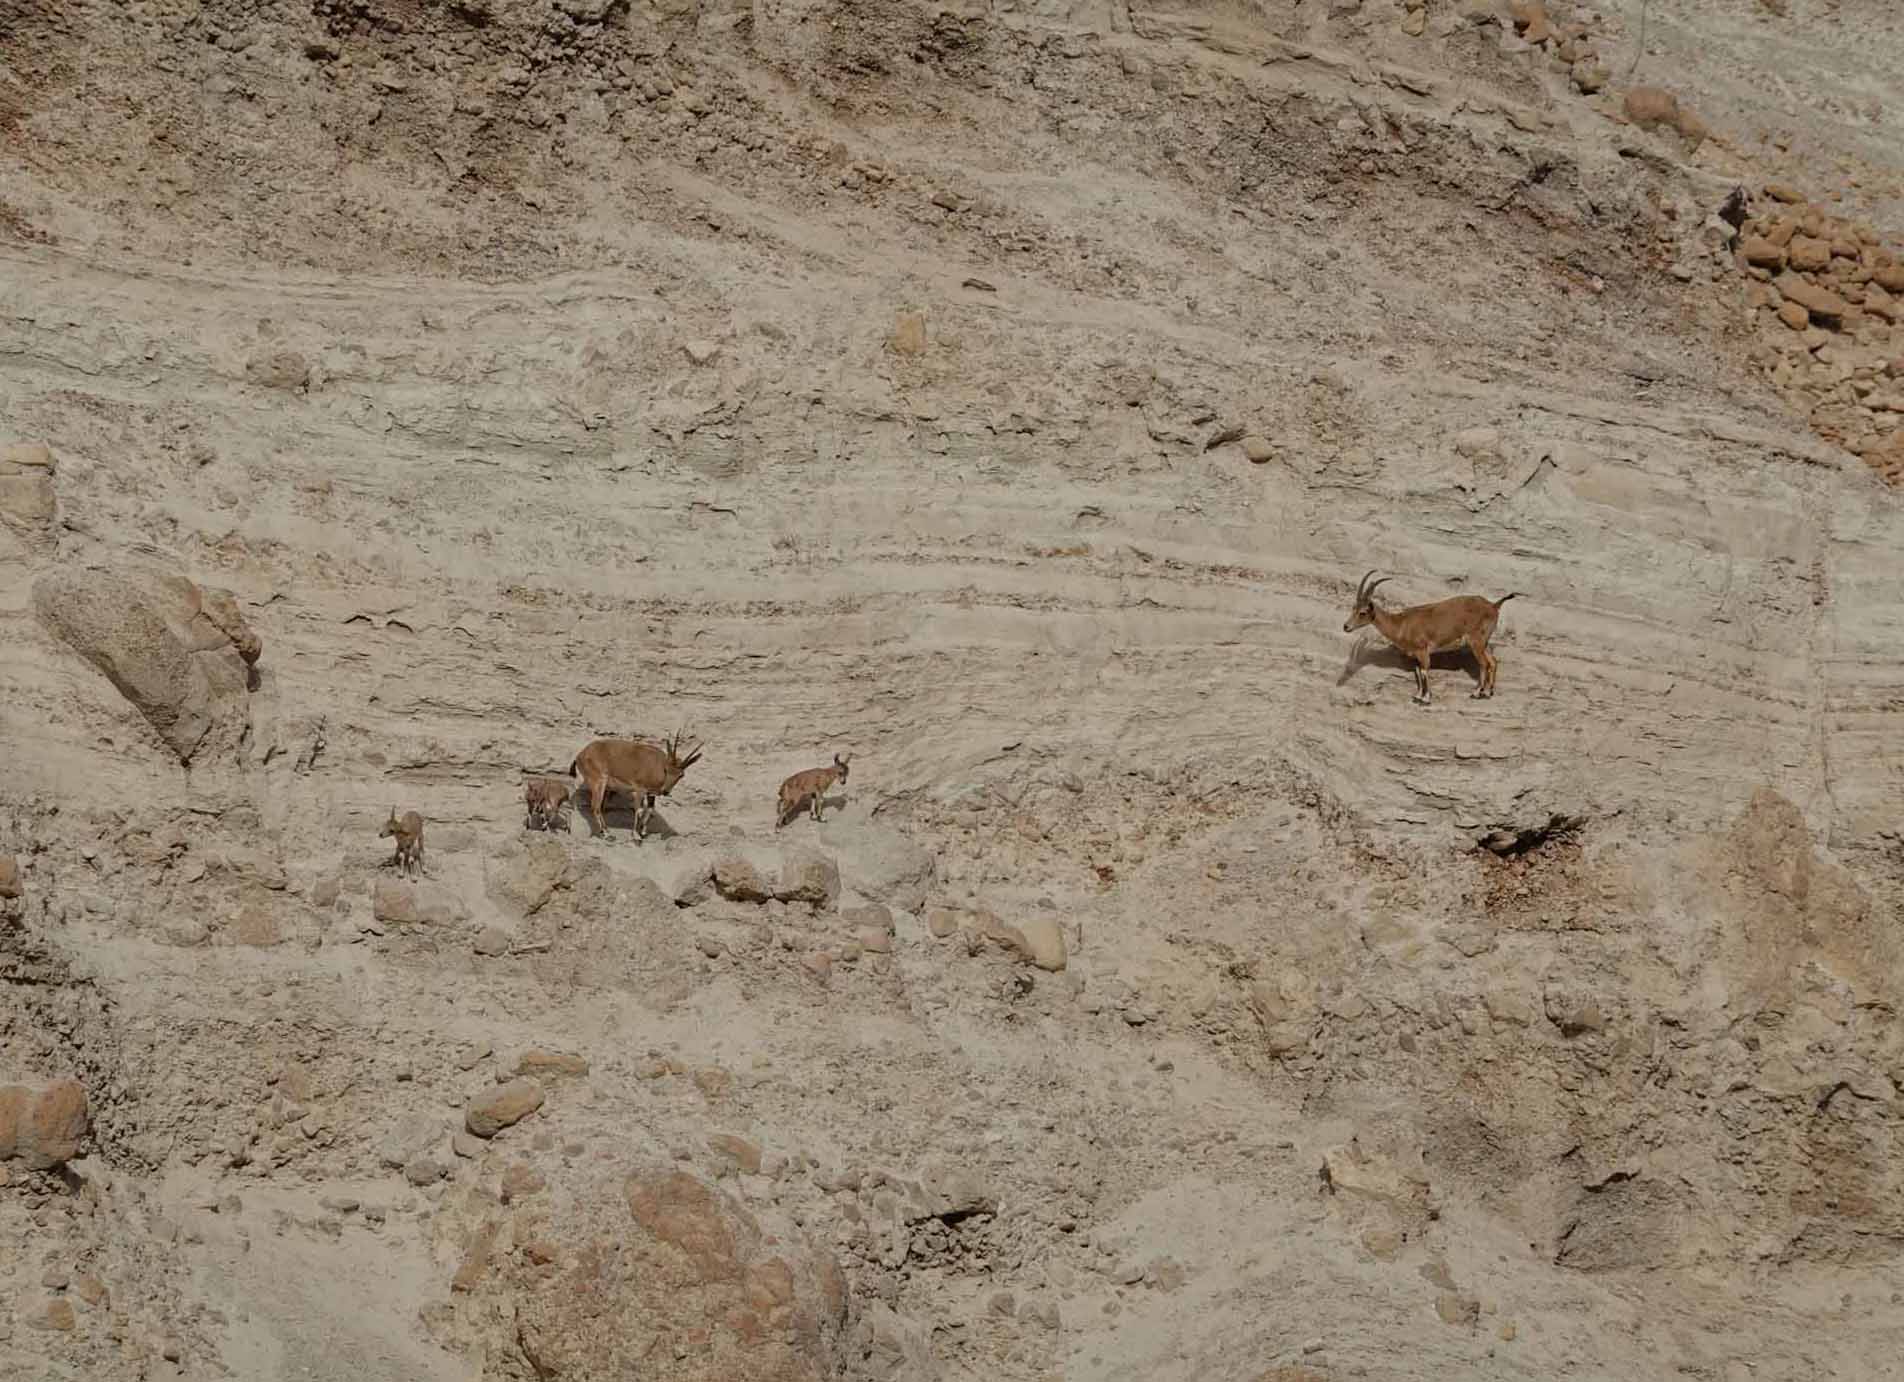 Ibex of the Ein Gedi Nature Reserve